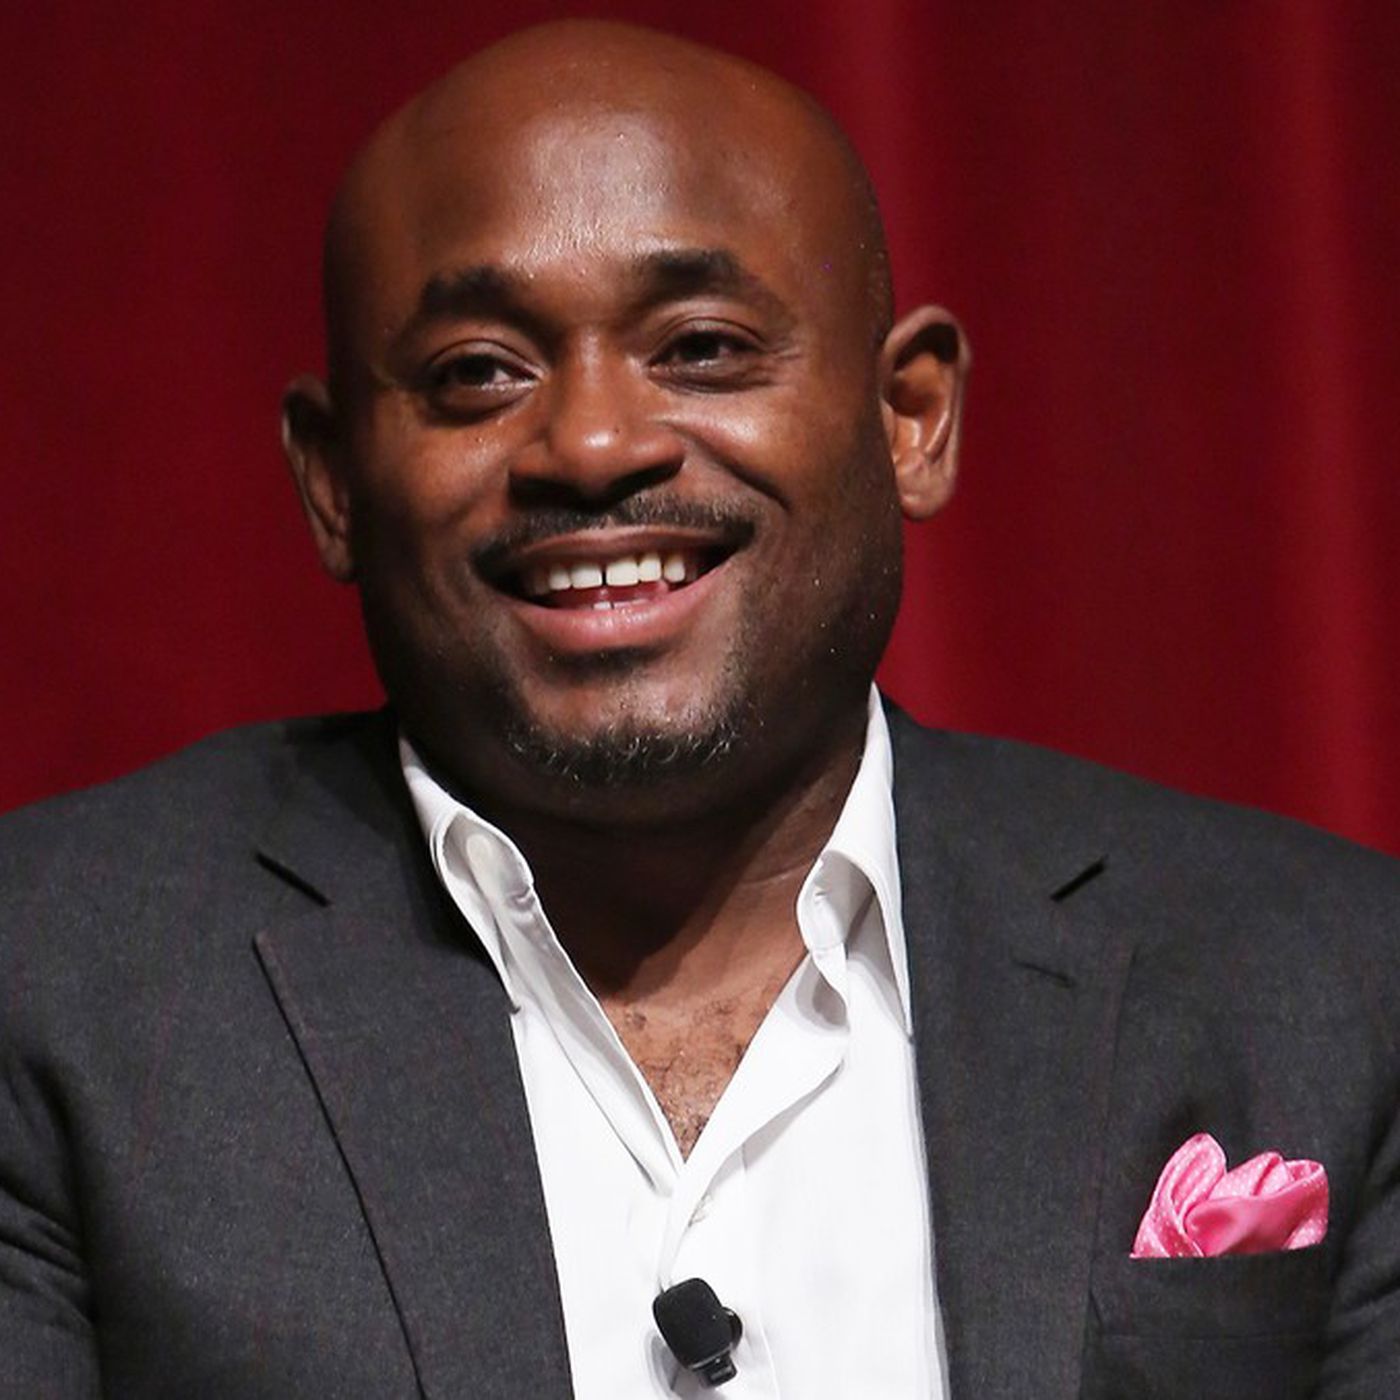 The 51-year old son of father (?) and mother(?) Steve Stoute in 2022 photo. Steve Stoute earned a  million dollar salary - leaving the net worth at  million in 2022